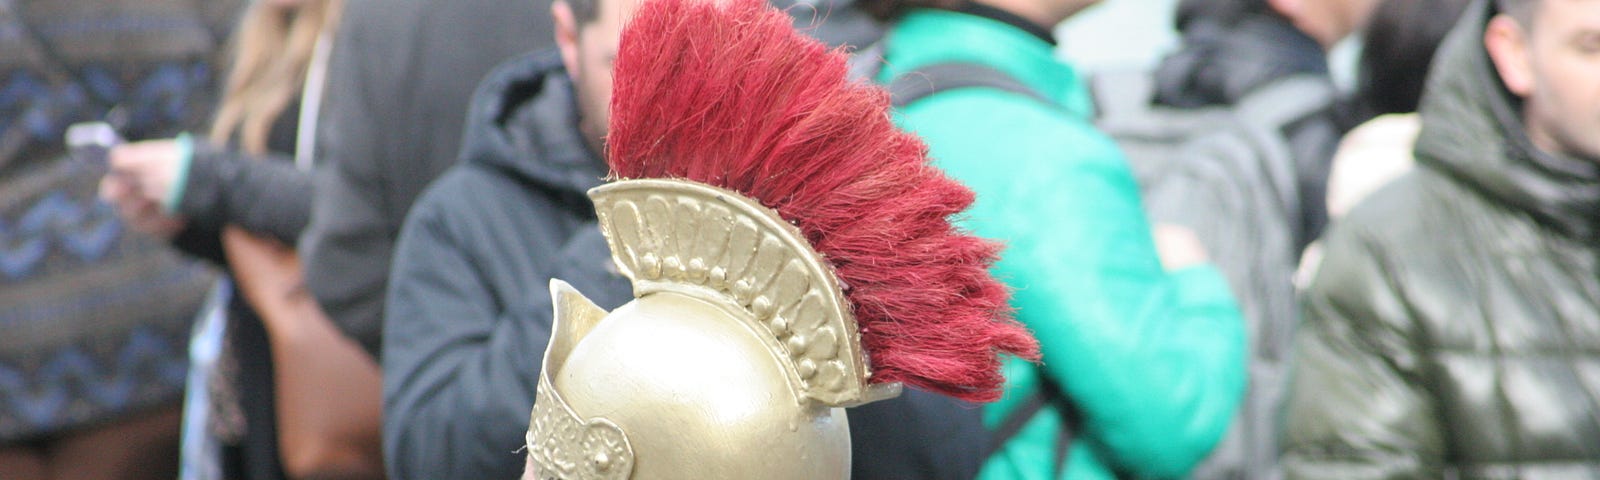 Gold centurion’s helmet with red crest against a background of people